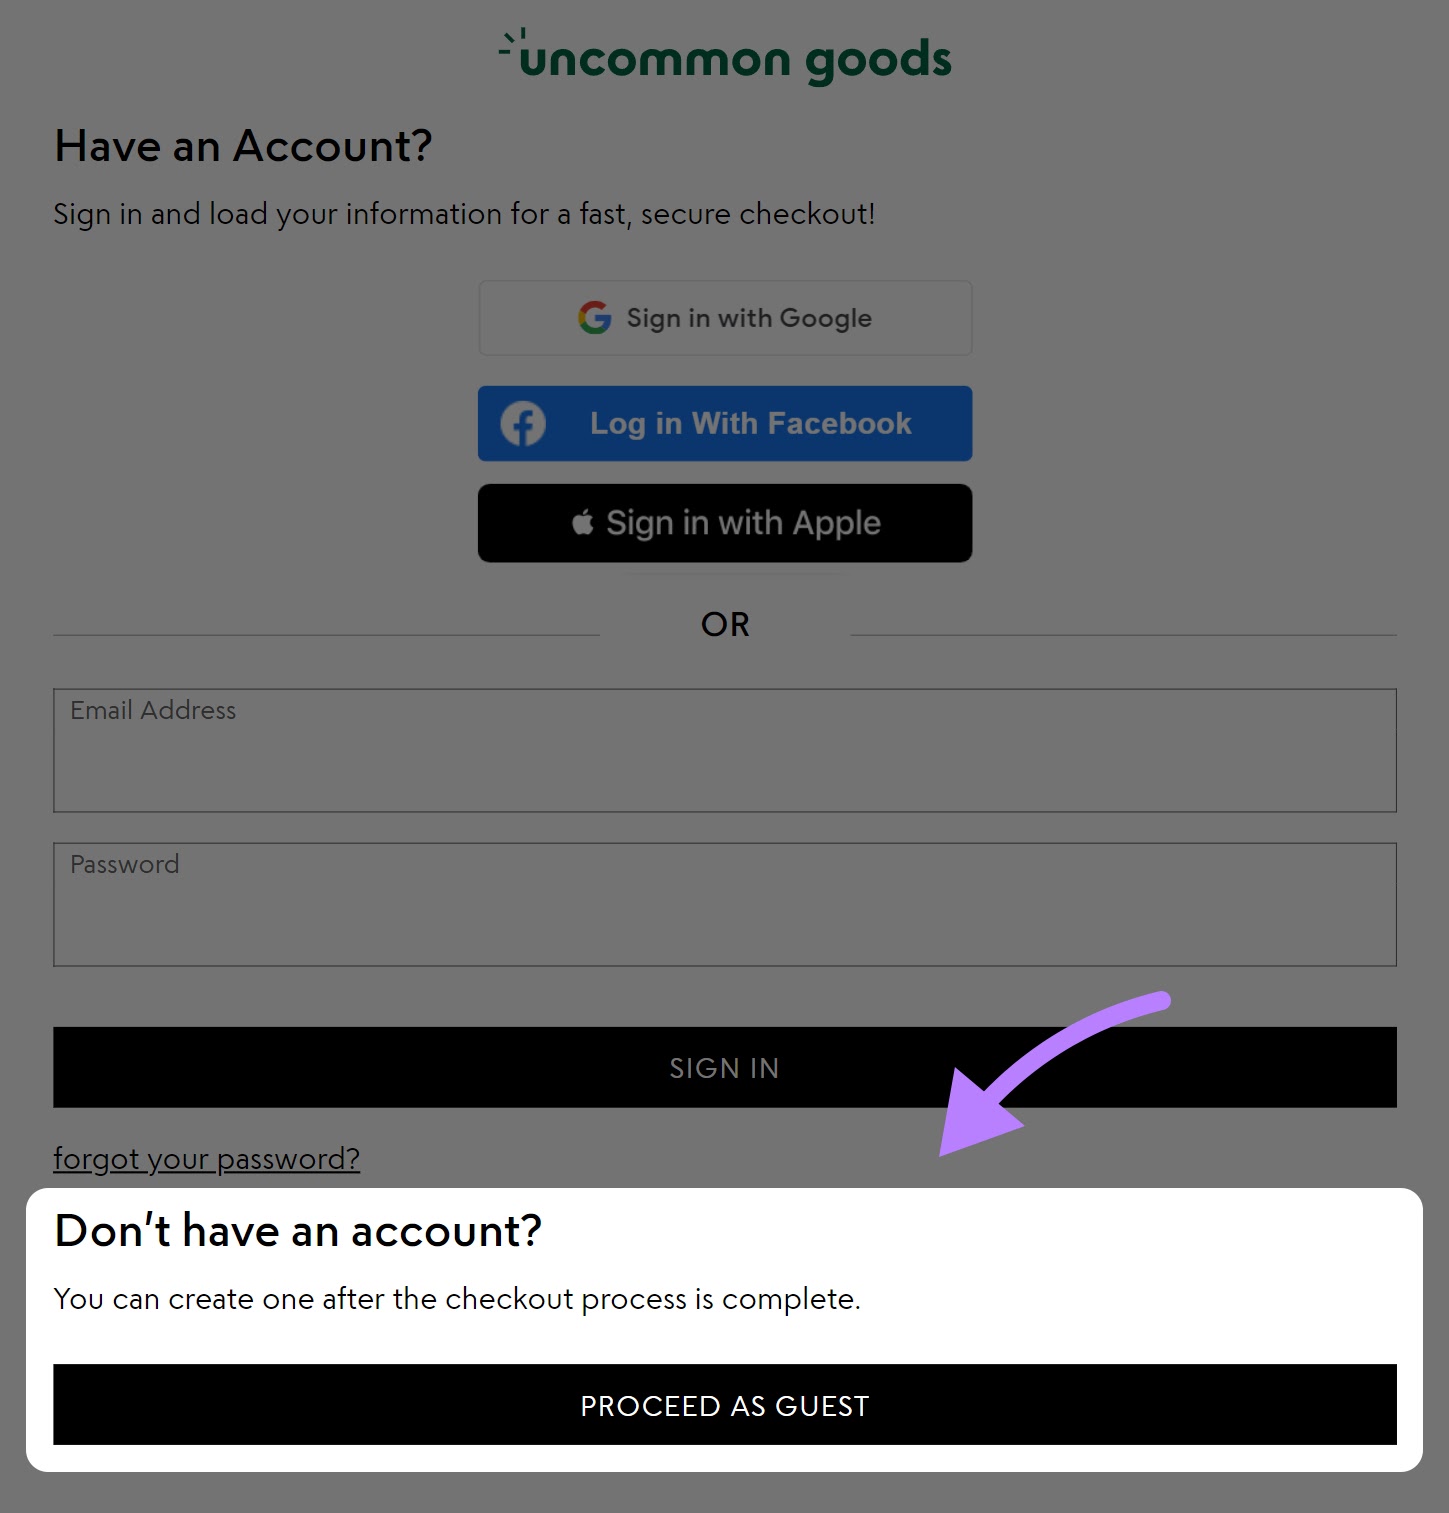 "Proceed as guest" option shown under Uncommon Goods' checkout